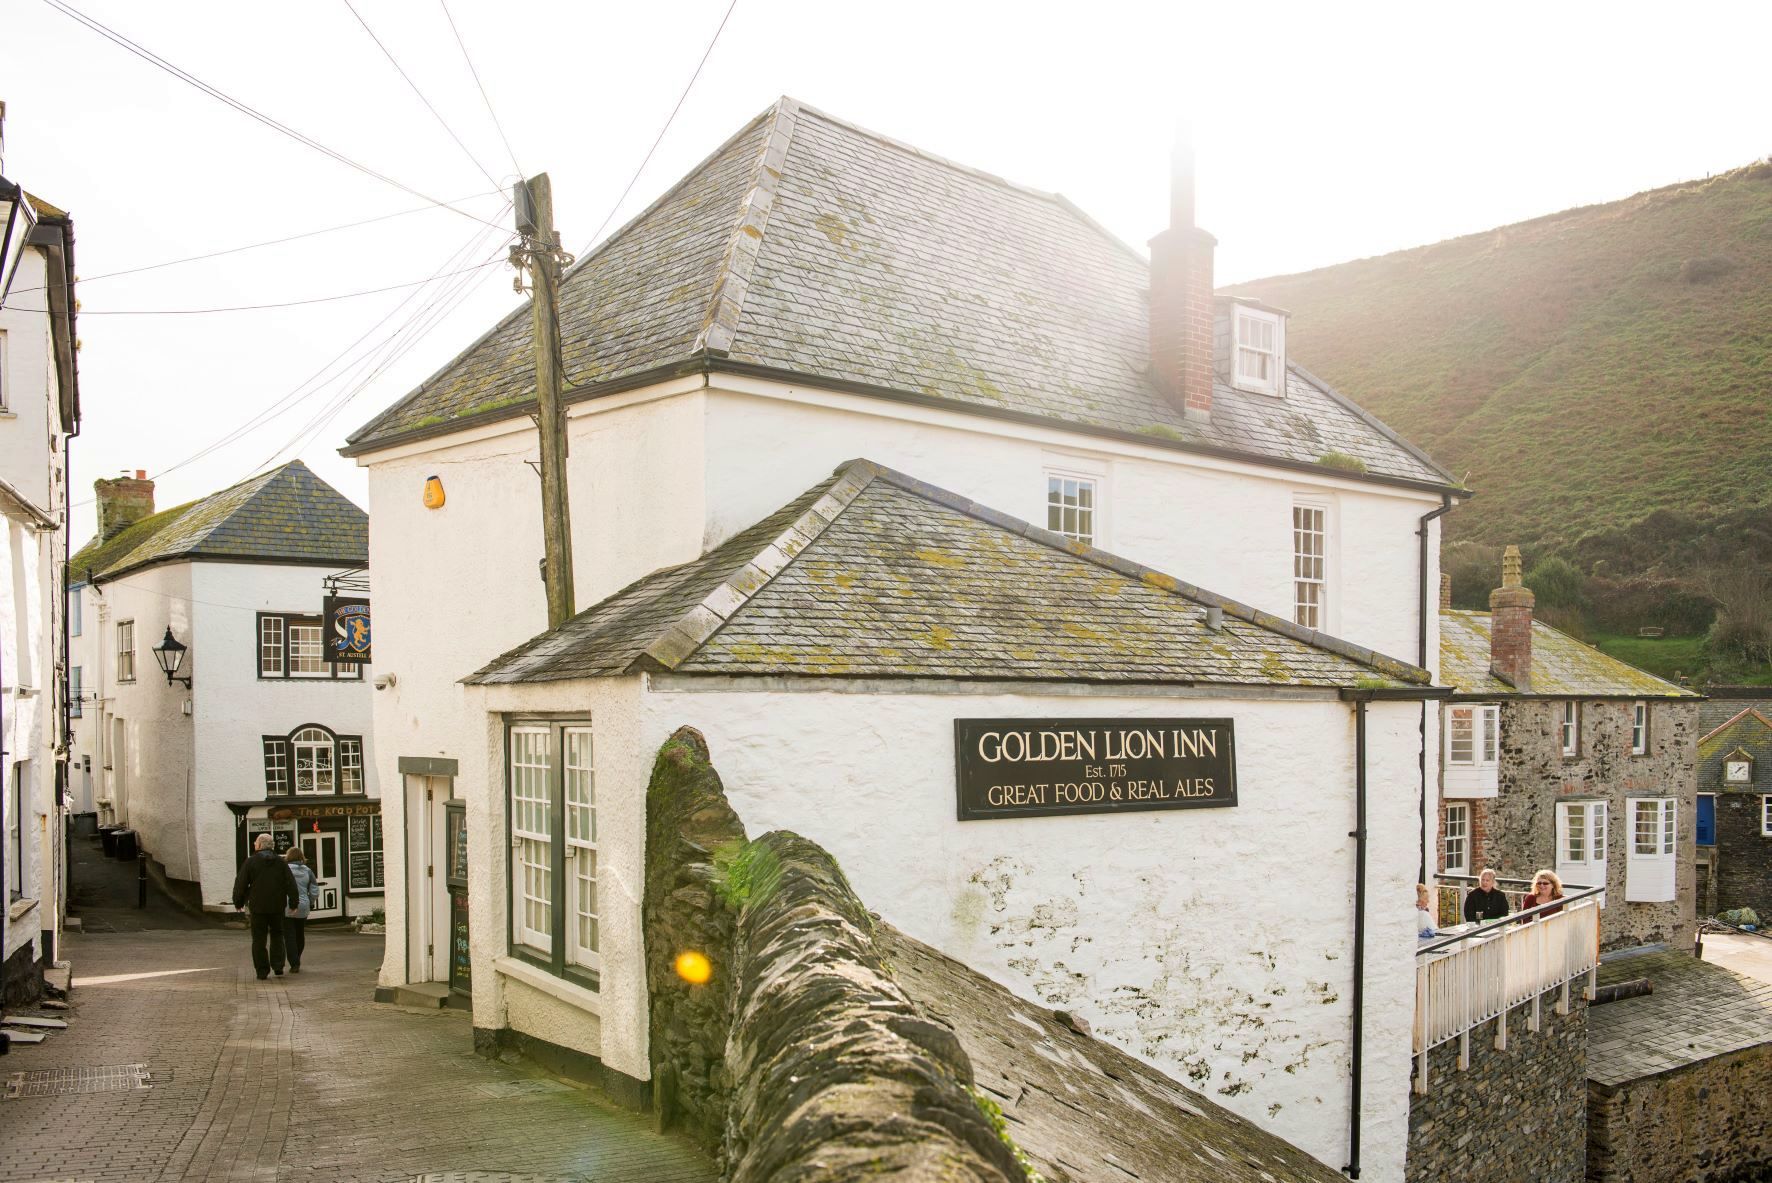 St Austell Brewery is looking for new licensees for the Golden Lion